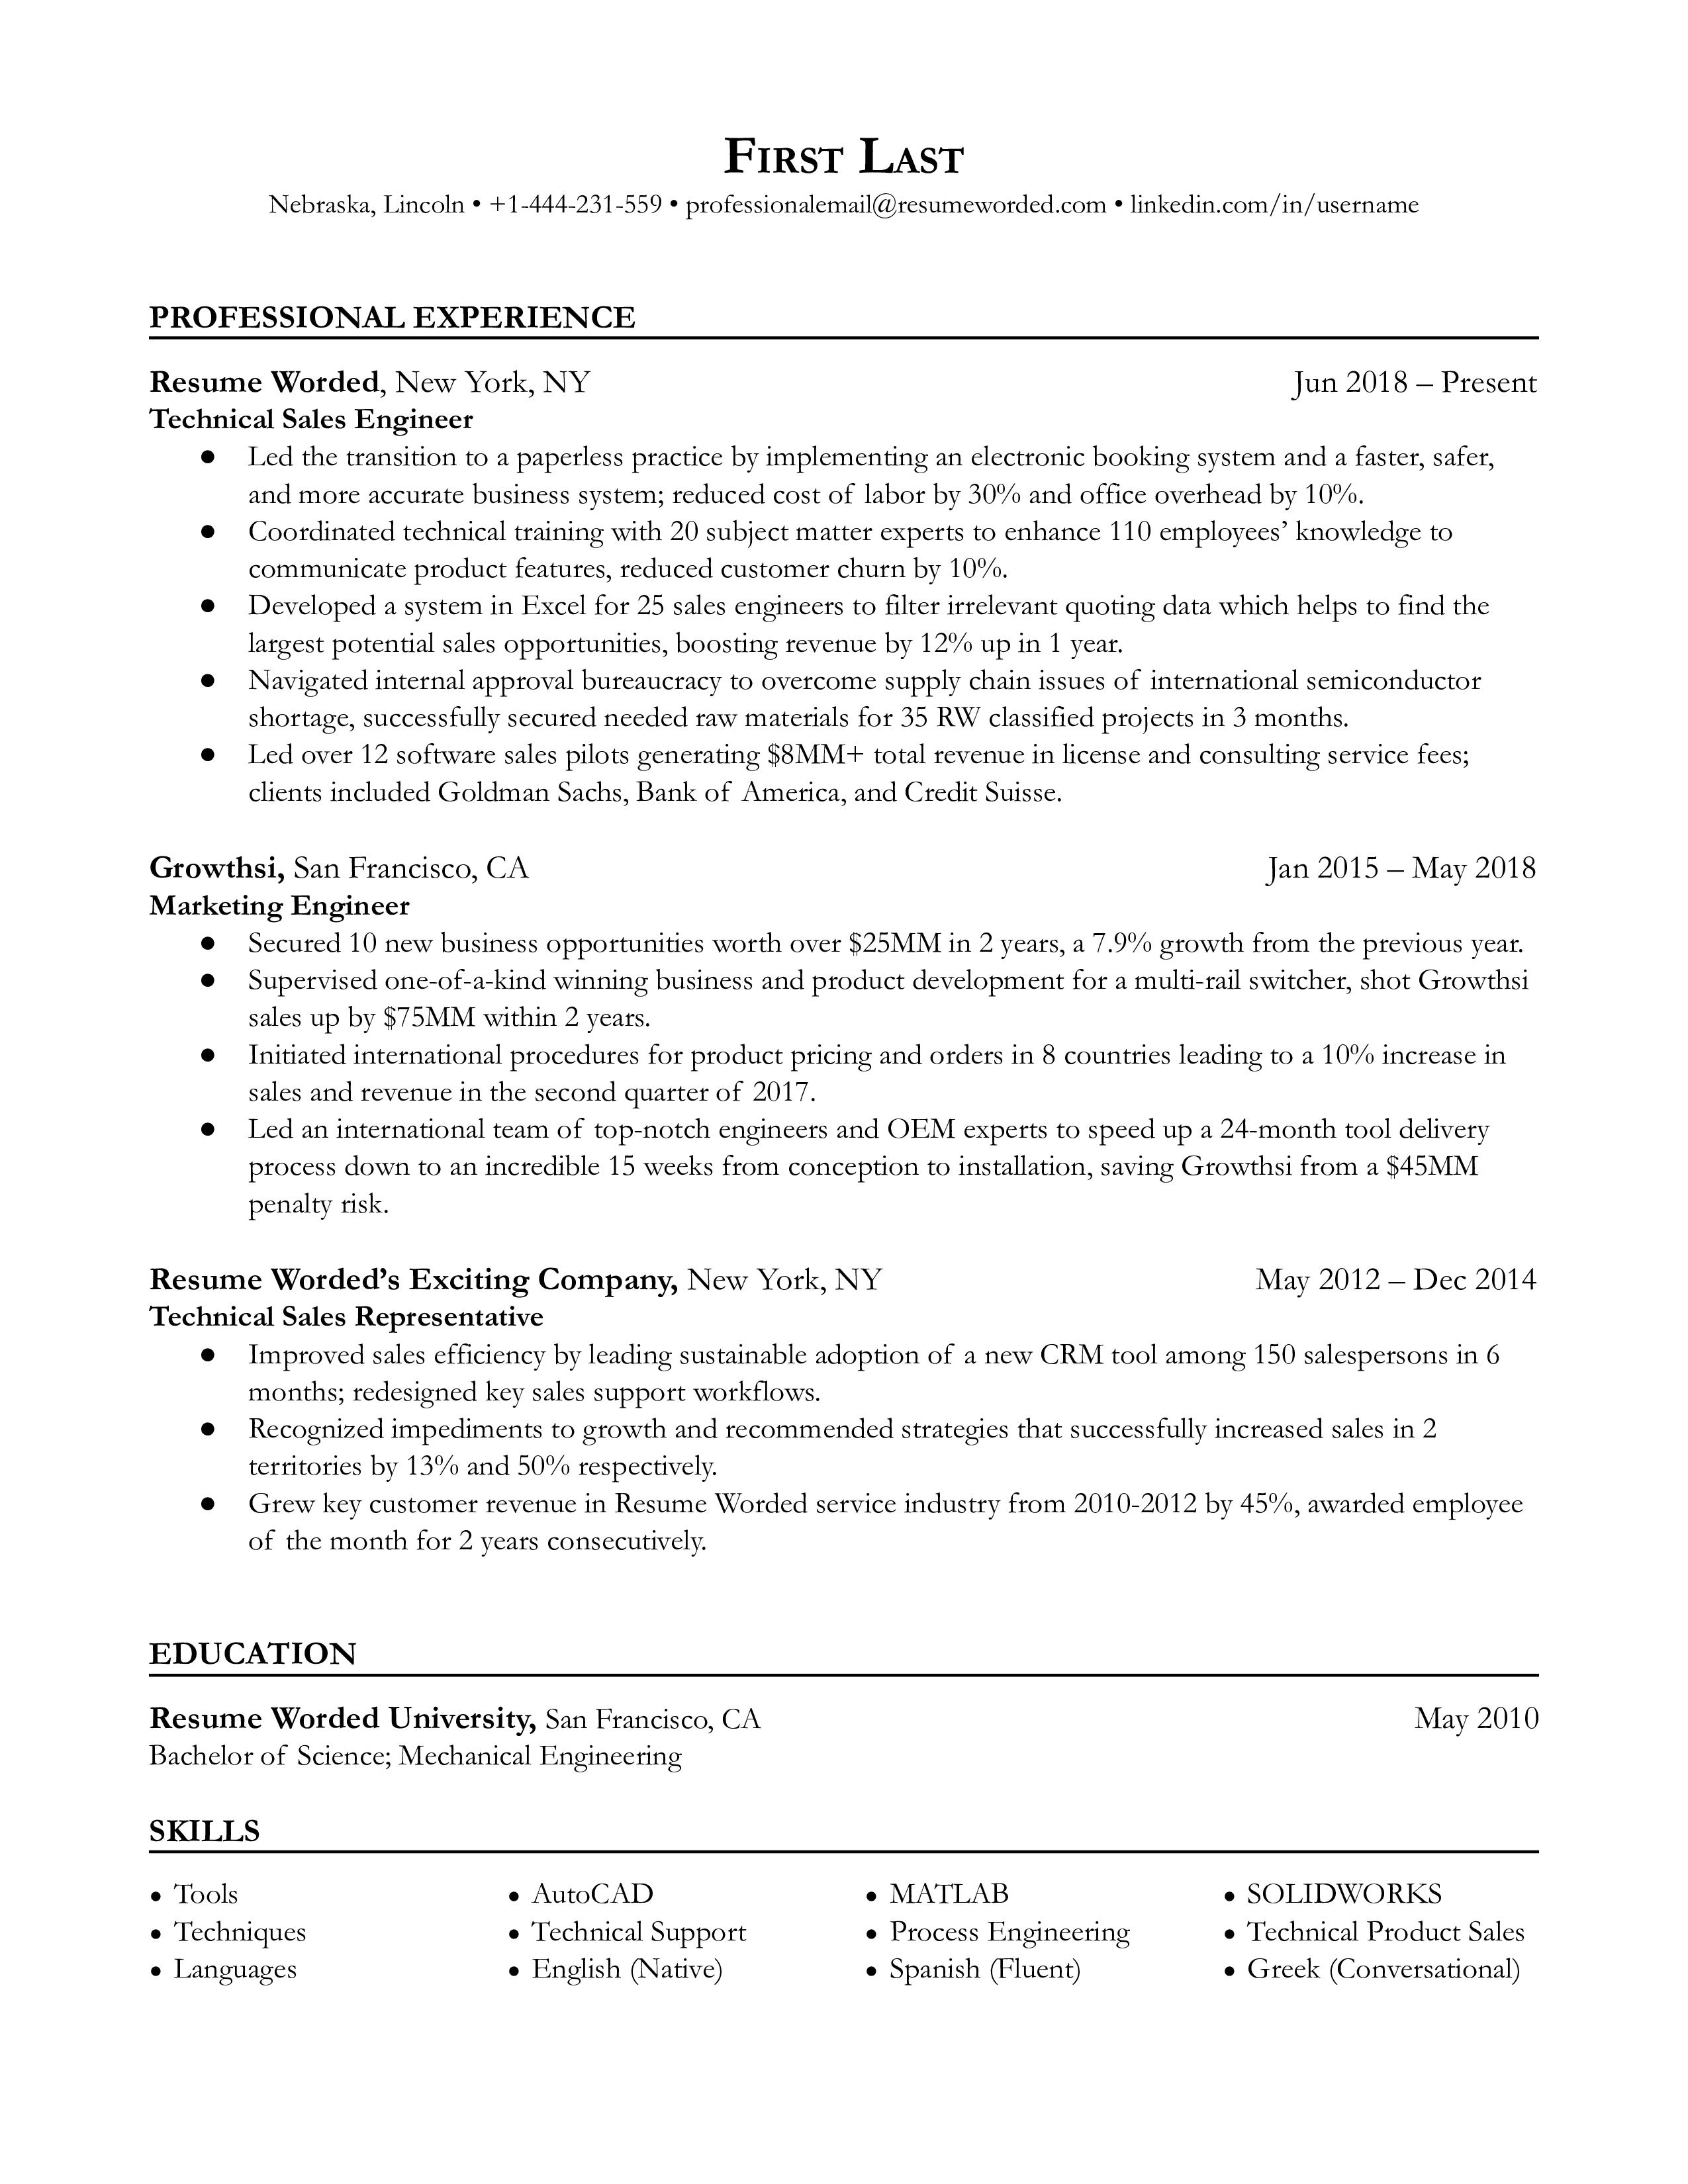 A polished resume for a Technical Sales Engineer role showcasing technical acumen and solid communication skills.